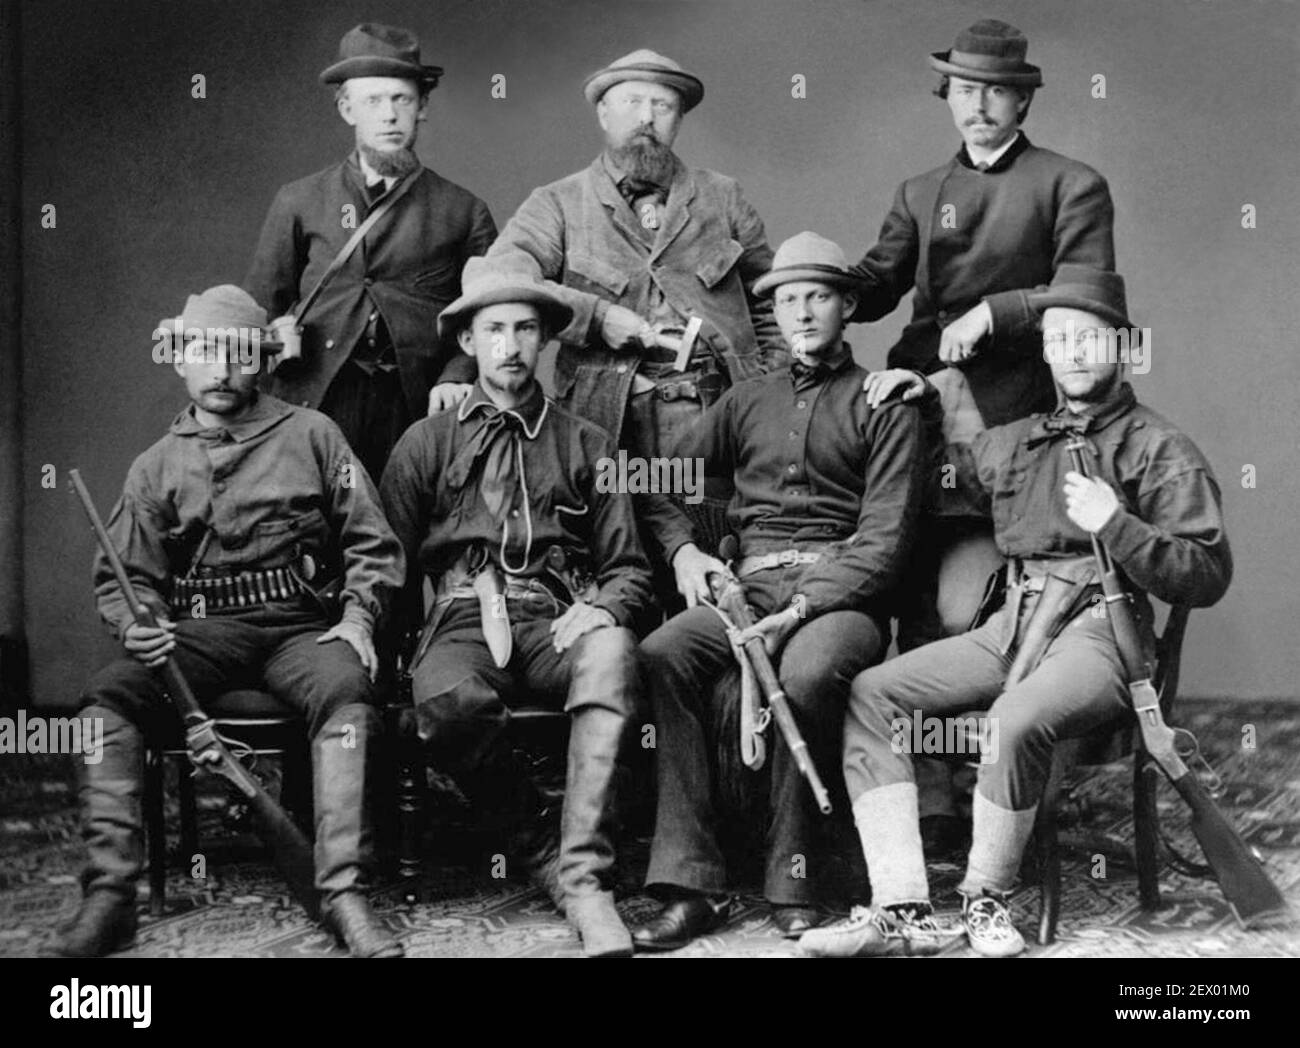 Othniel Charles Marsh (1831–1899), American professor of Paleontology at Yale College and President of the National Academy of Sciences (pictured back row and center), along with his 1872 expedition party. Marsh, who discovered 80 new species of dinosaurs, competed with fellow paleontologist Edward Drinker Cope from the 1870s to the 1890s in a period of frenzied Western American fossil hunting expeditions known as the 'Bone Wars'. Stock Photo